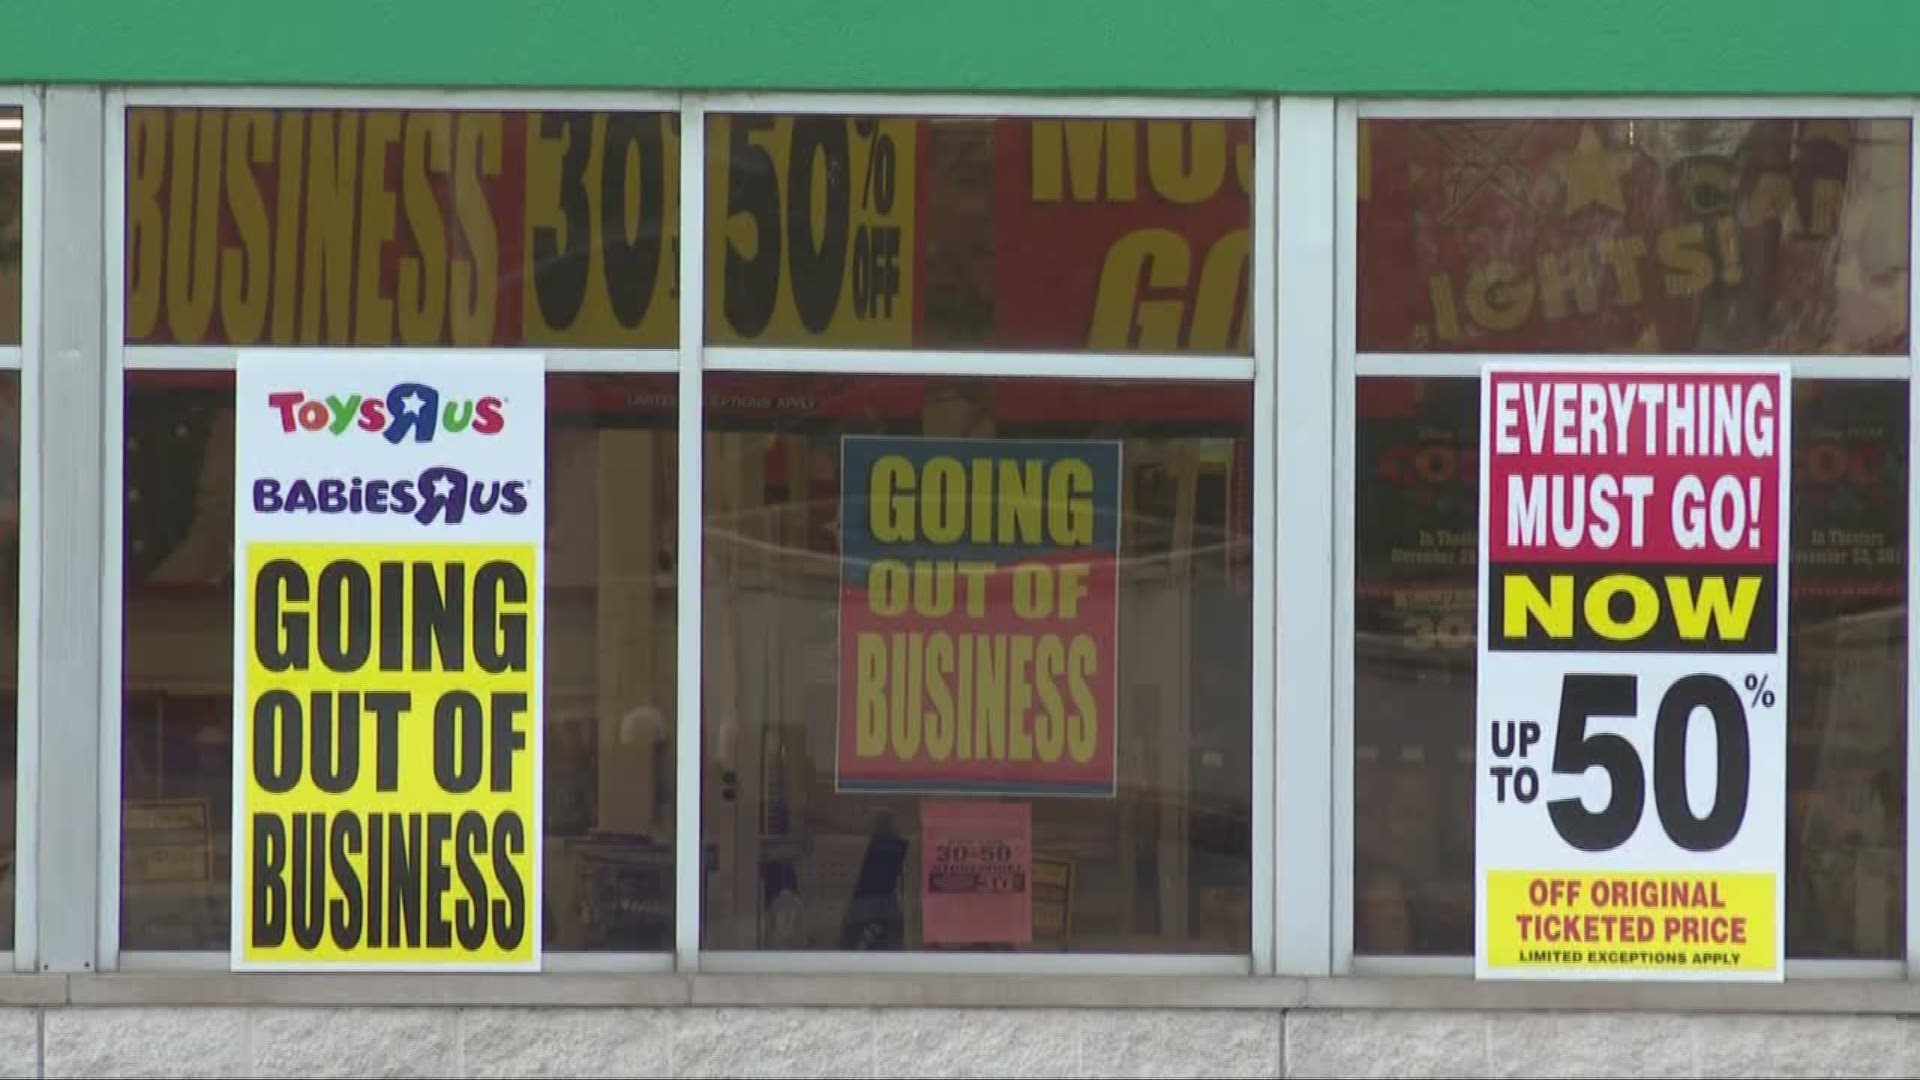 How good are the bargains at Toys R Us as they prepare to close?